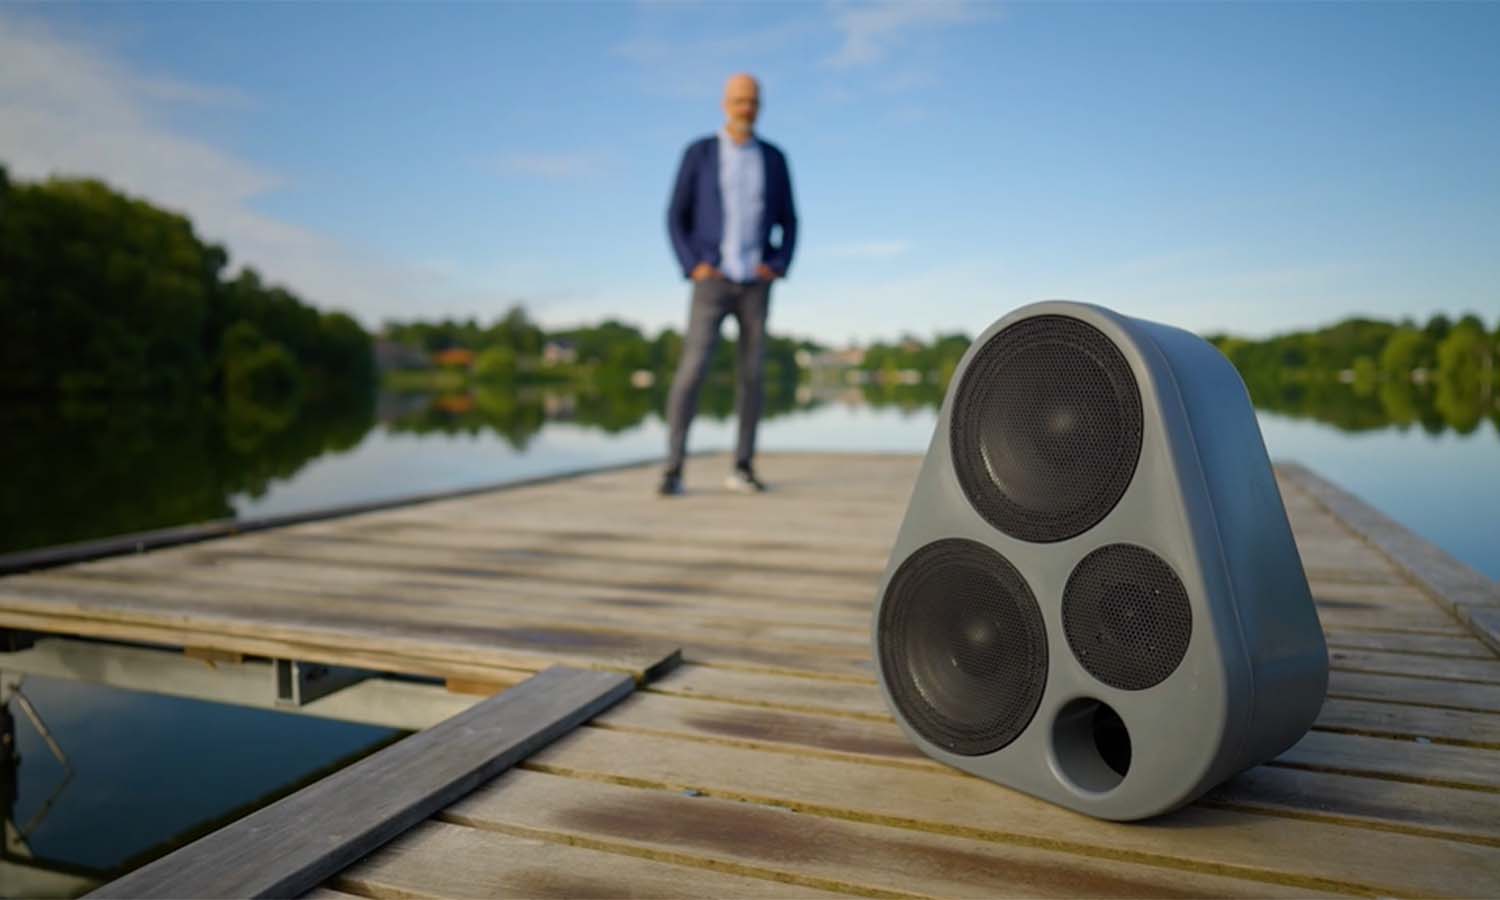 Enkl Sound Copenhagen. Durable design and materials for outdoor use.